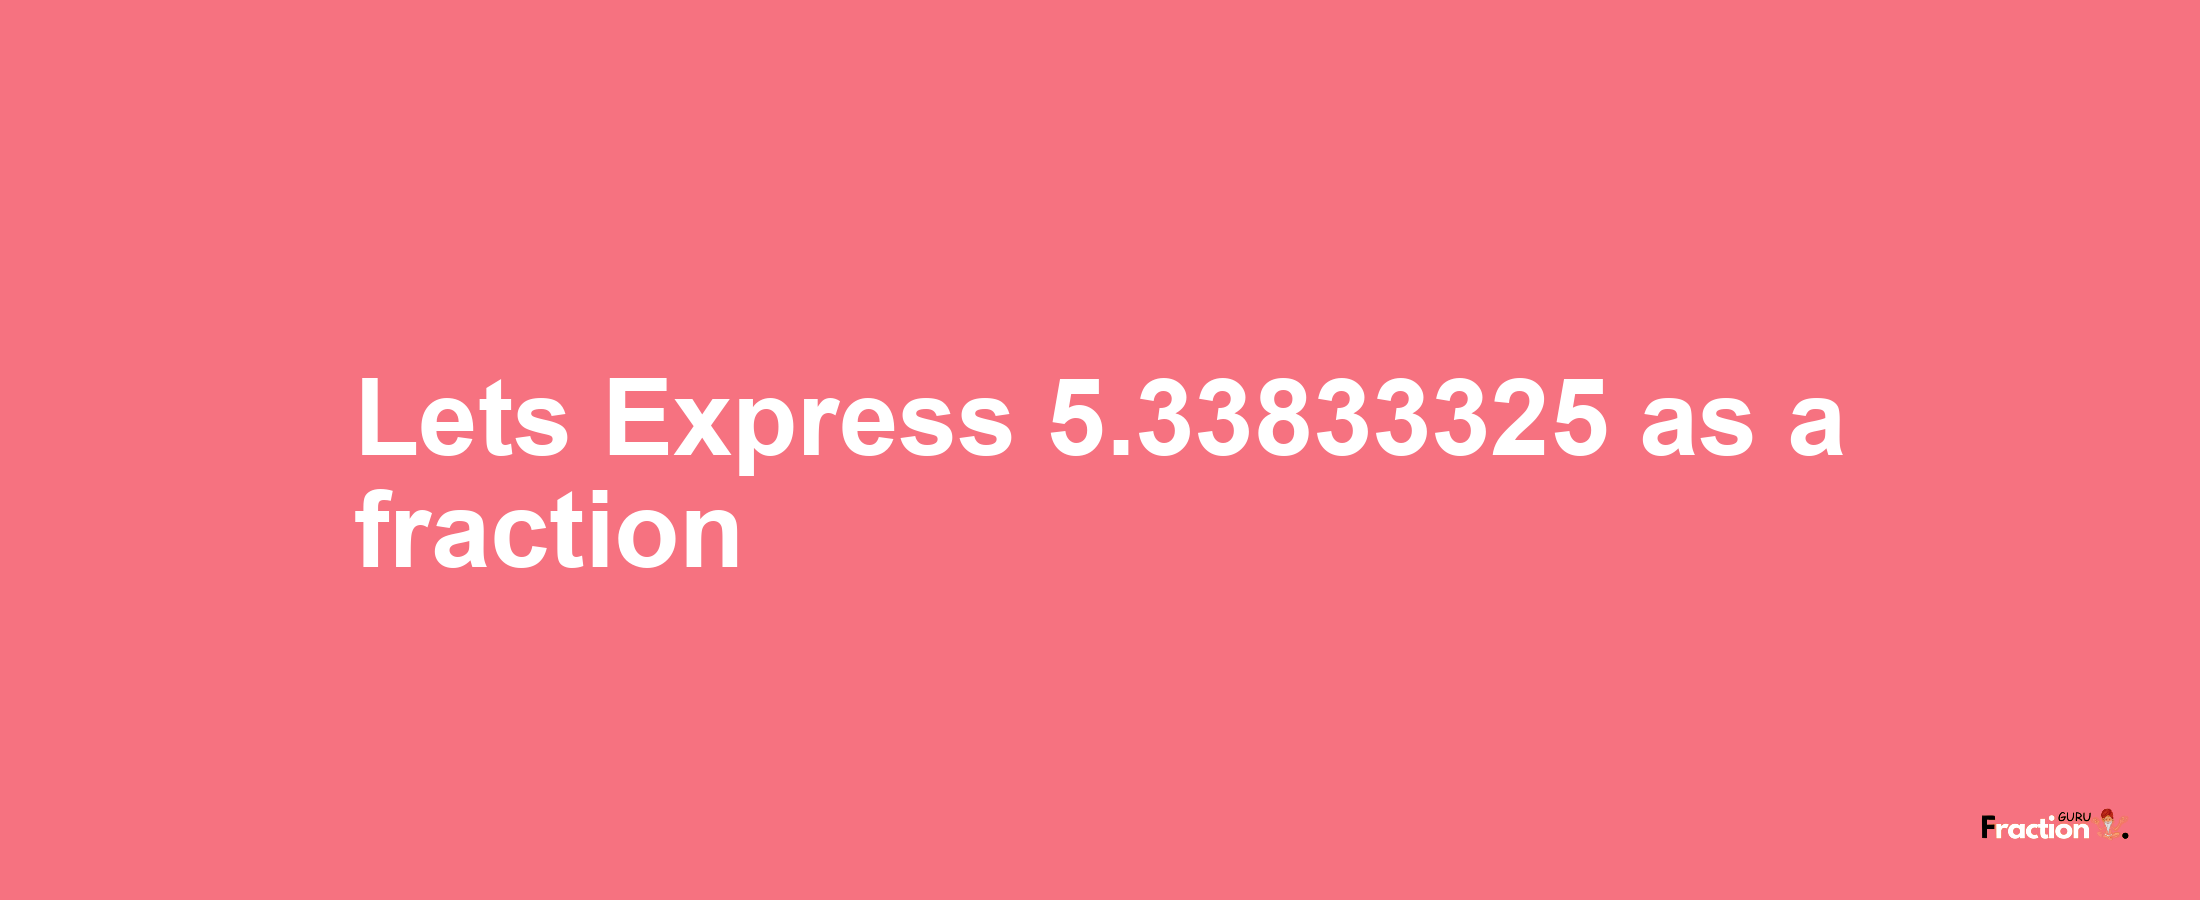 Lets Express 5.33833325 as afraction